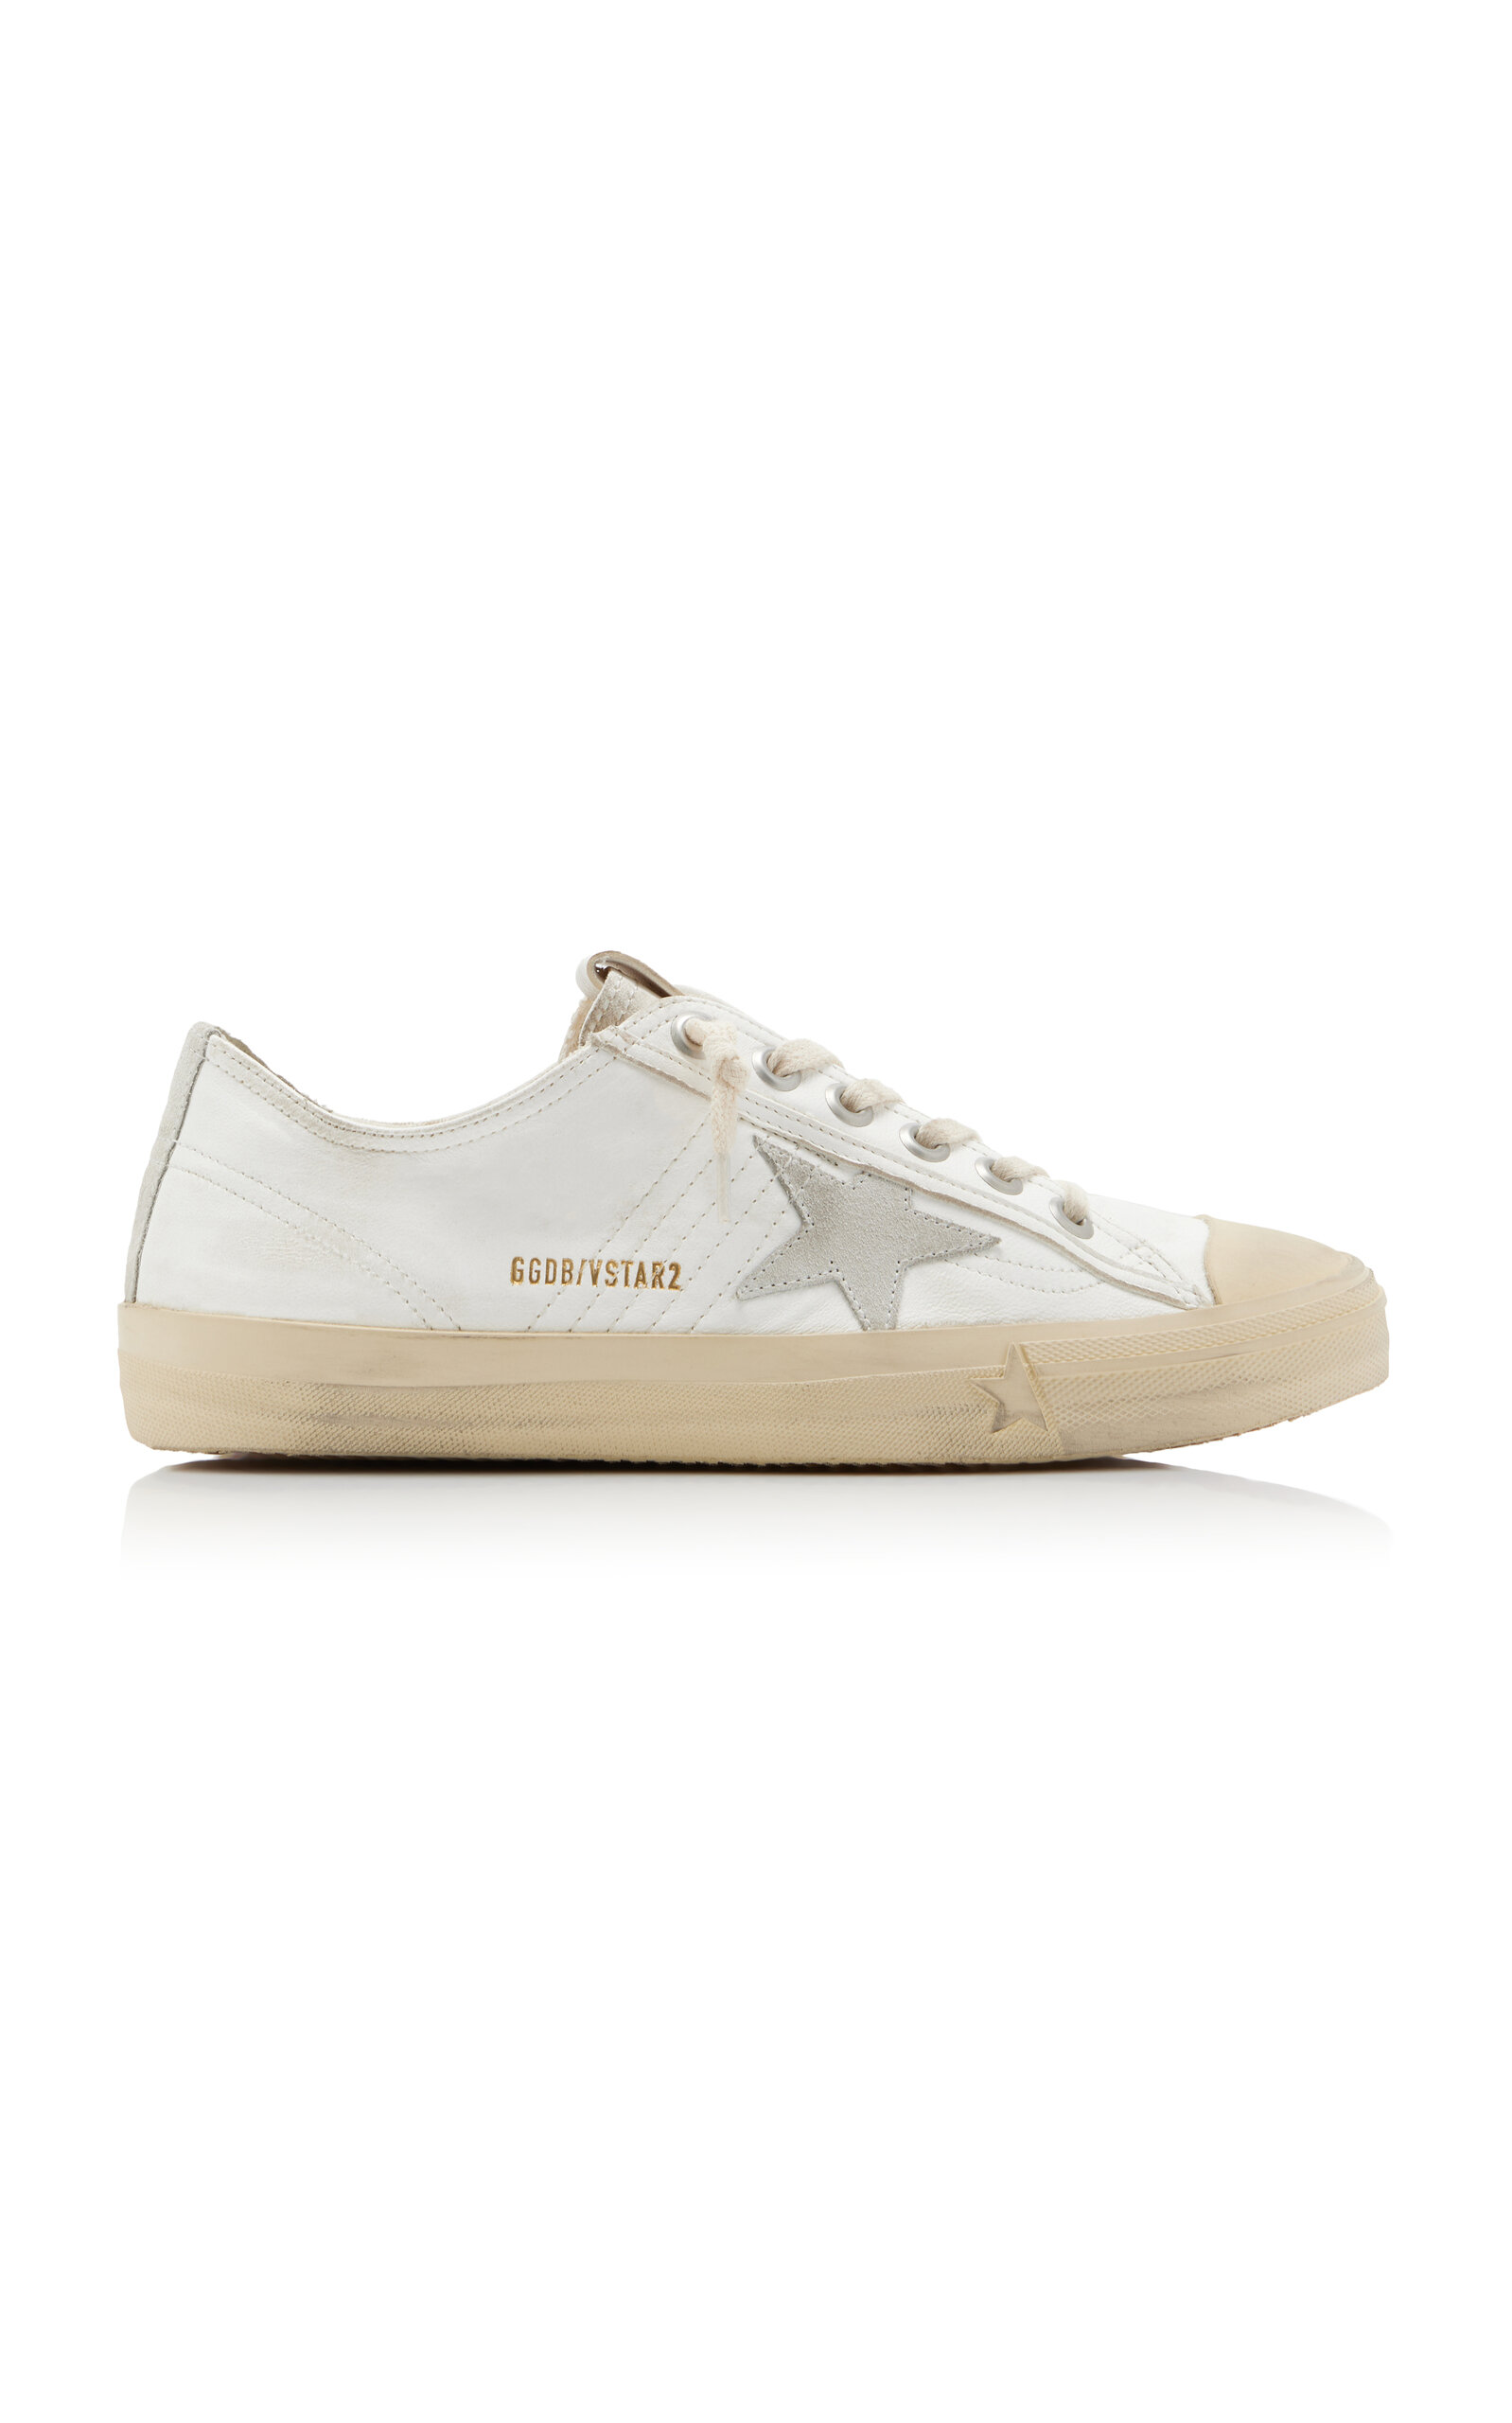 V-Star 2 Suede-Trimmed Leather Sneakers